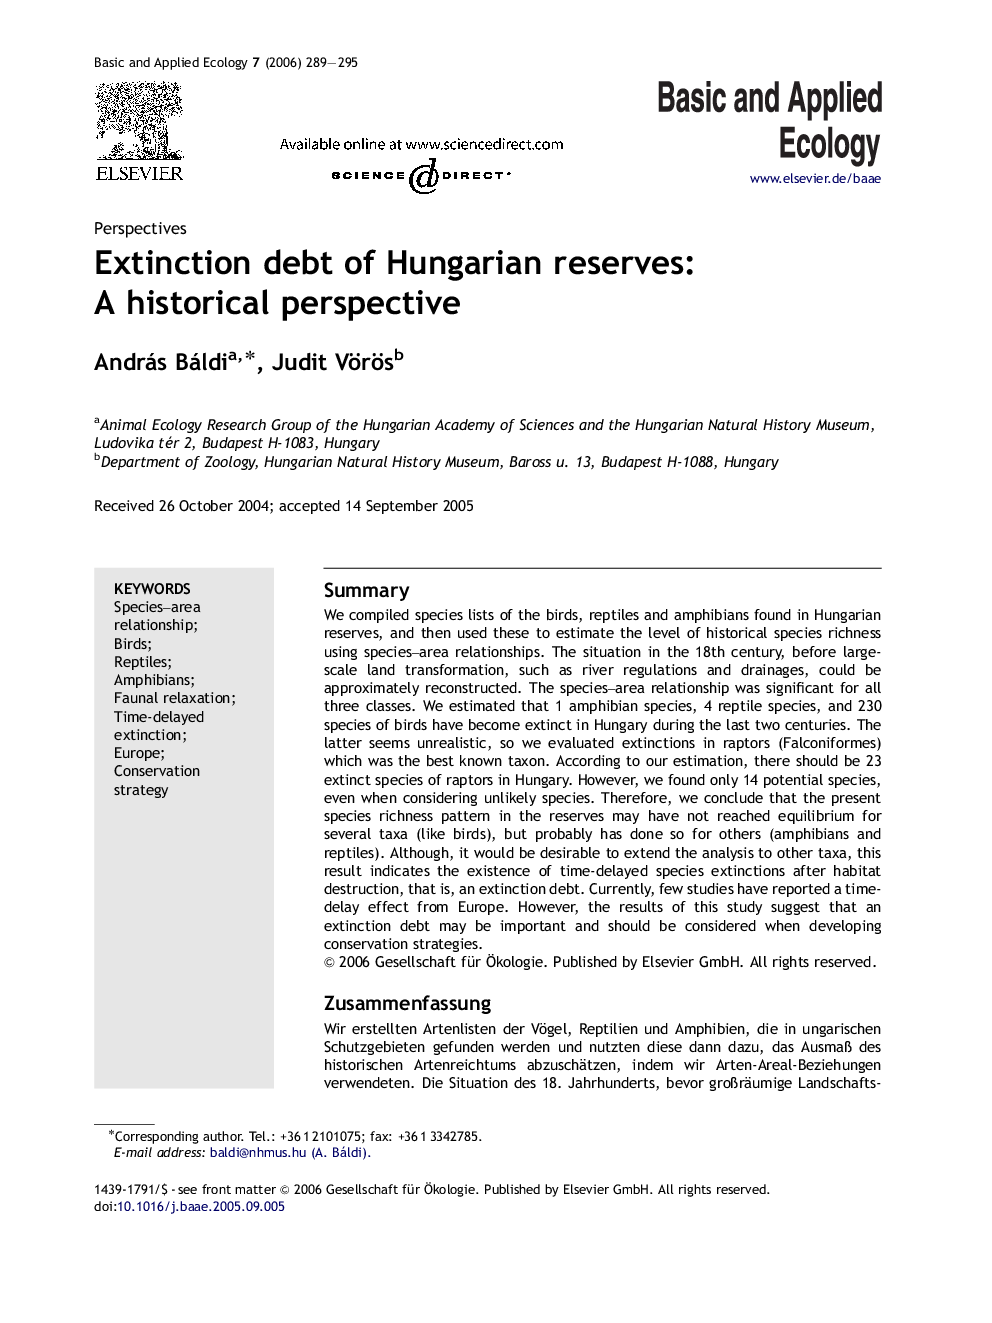 Extinction debt of Hungarian reserves: A historical perspective